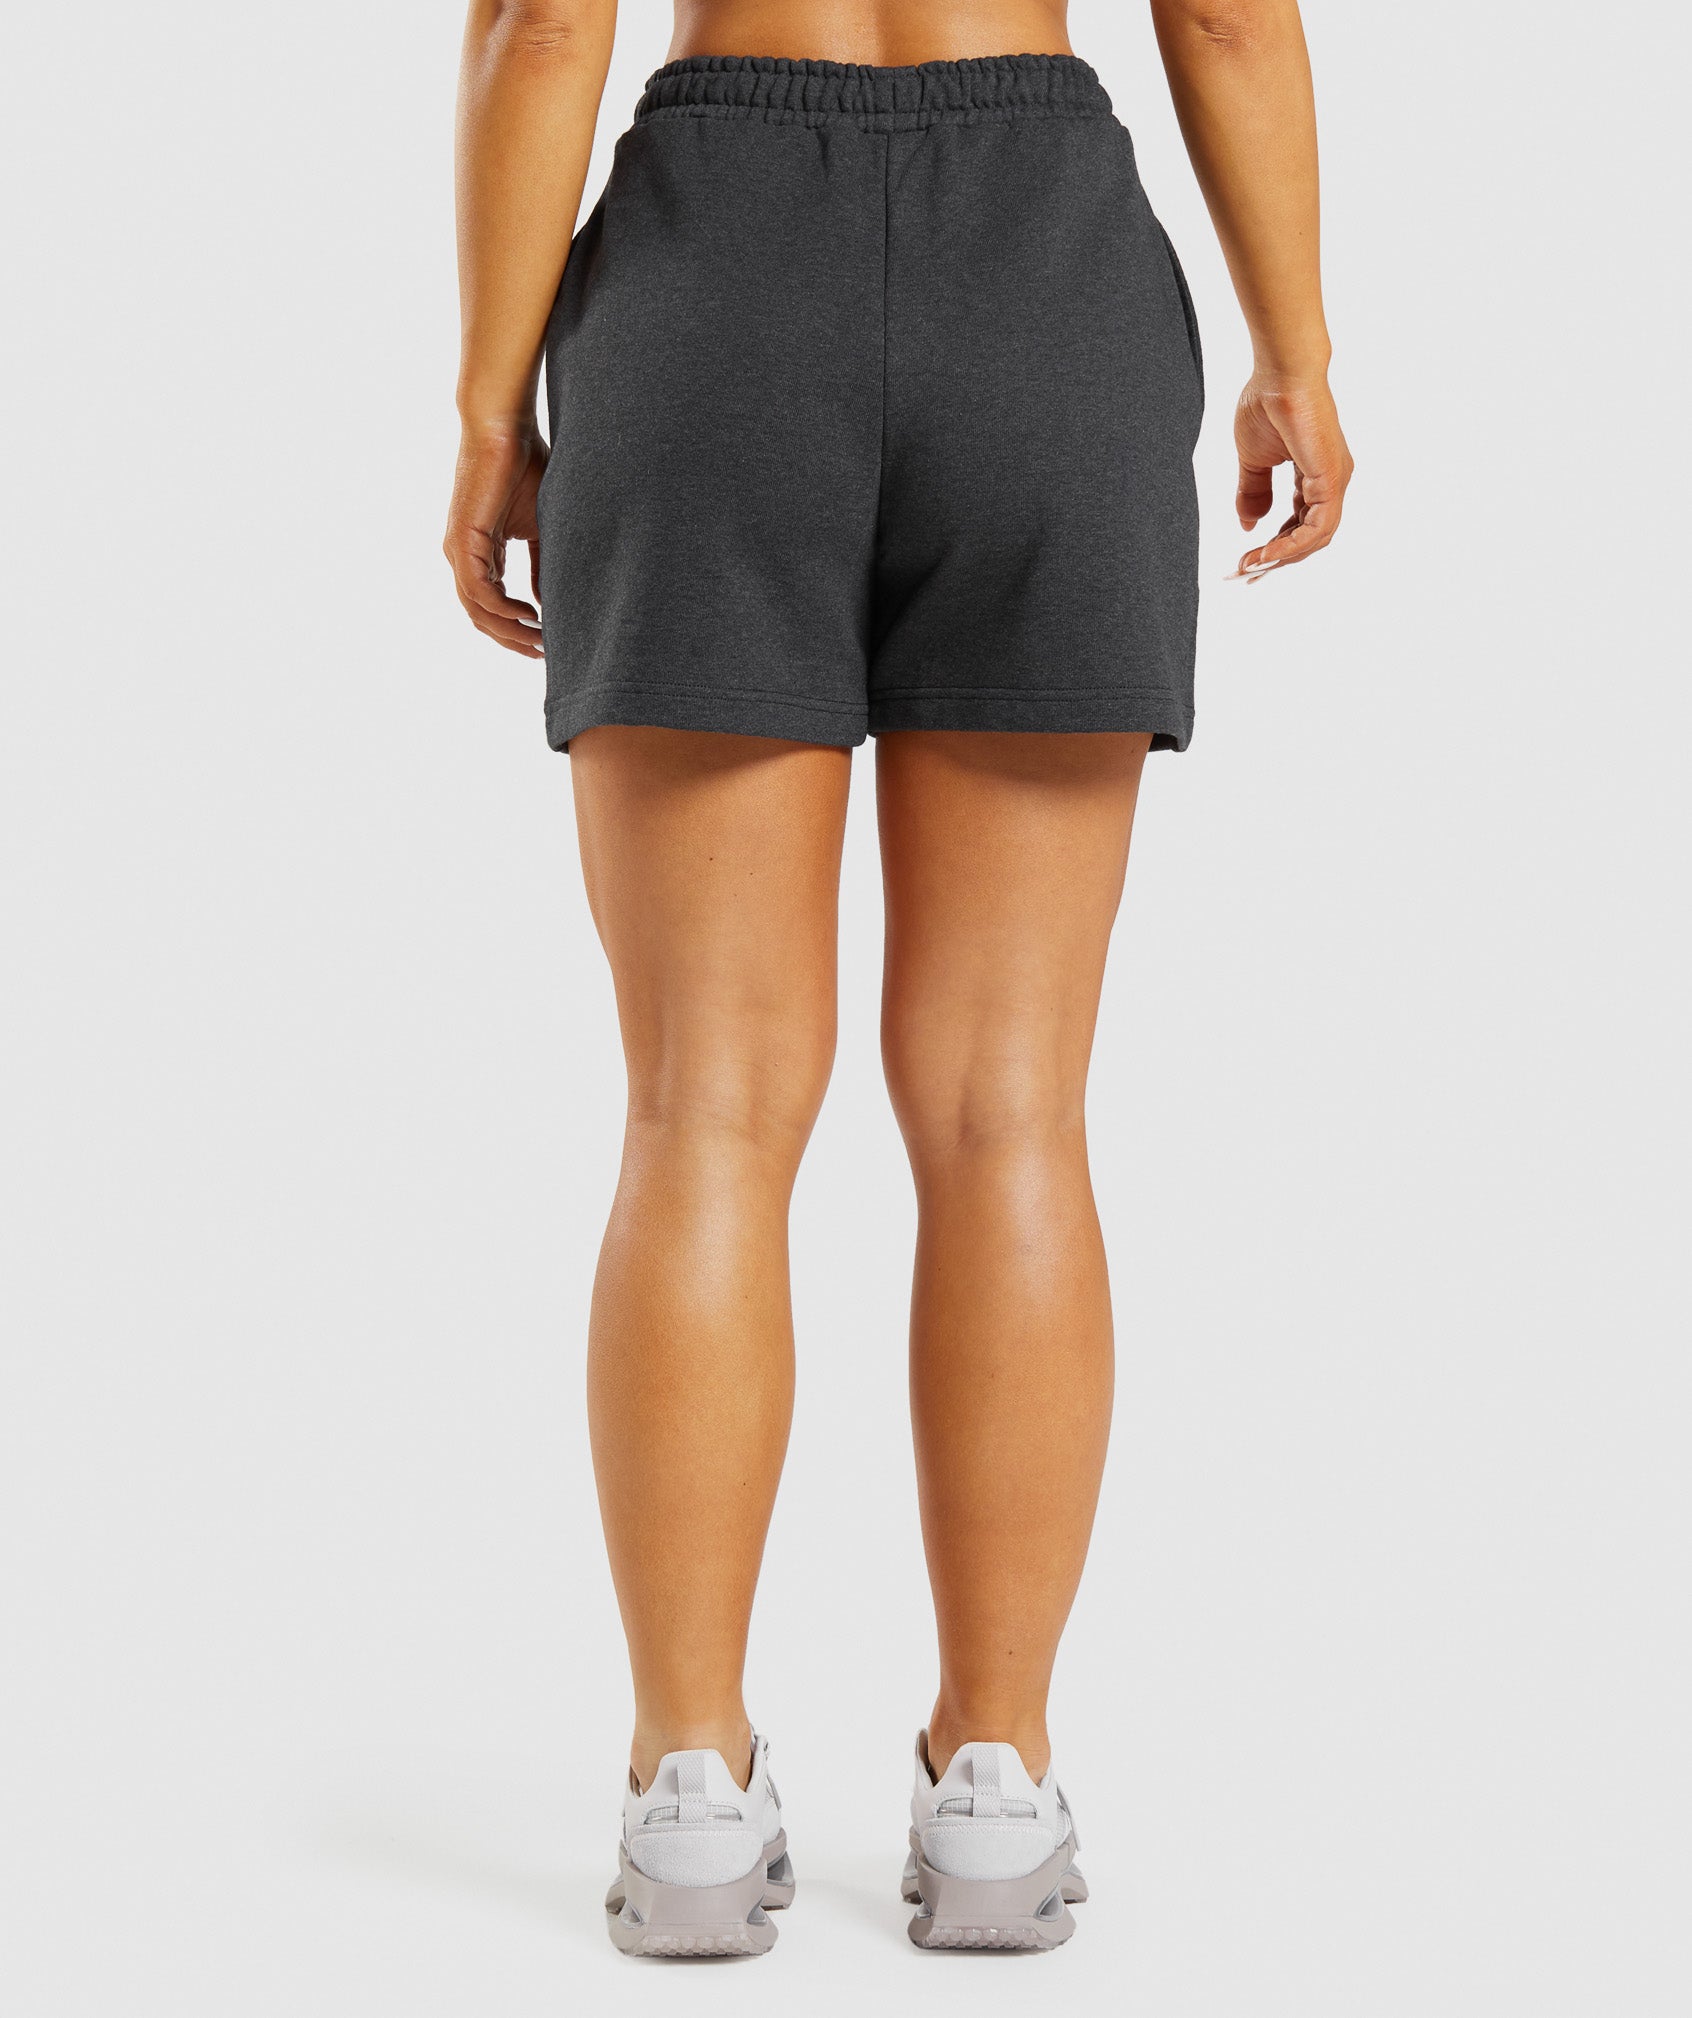 Rest Day Sweats Shorts in Black Core Marl - view 2